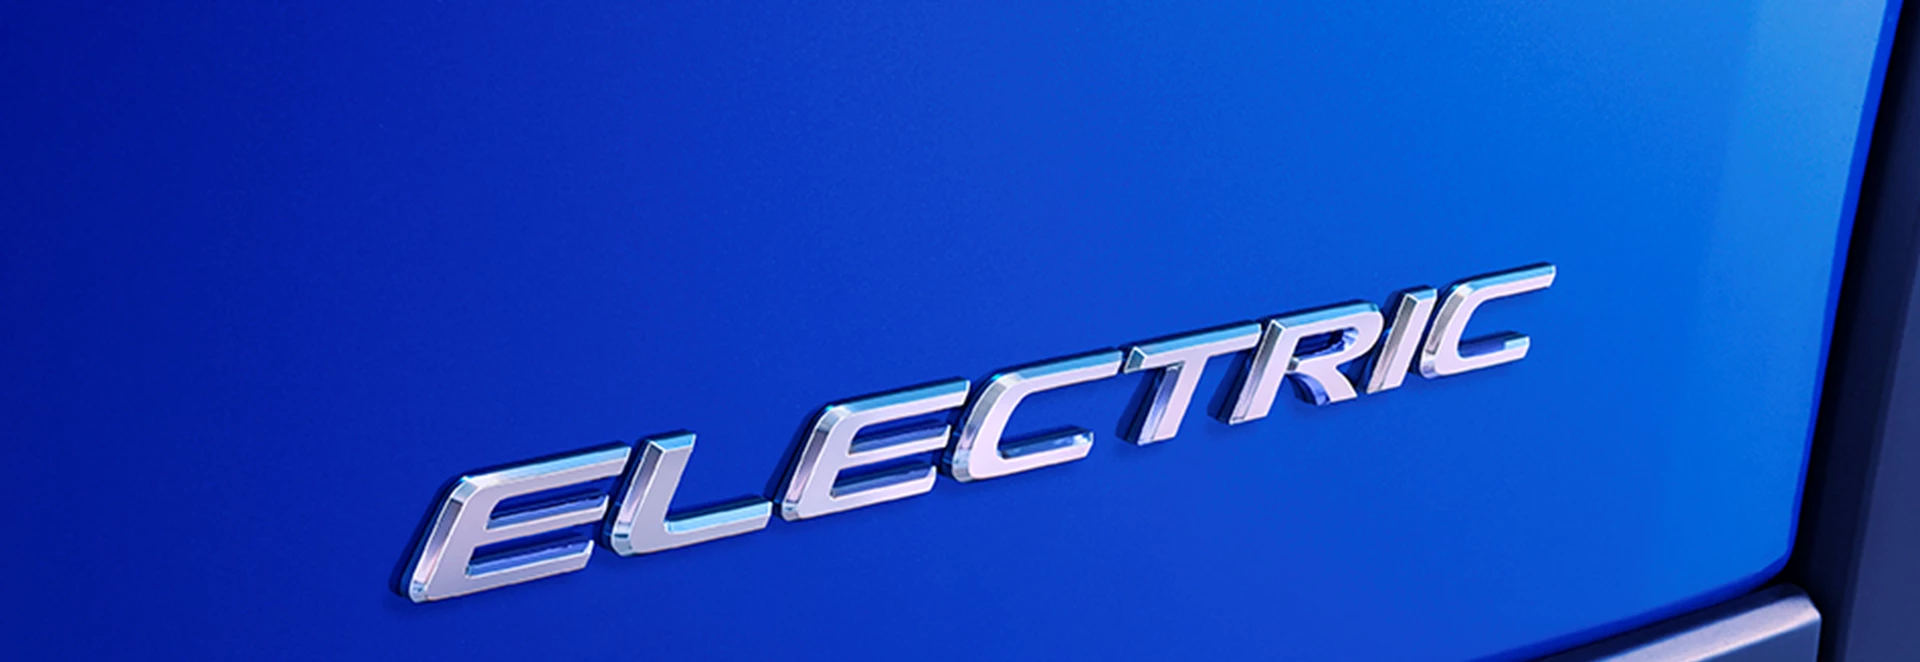 Lexus to unveil its first Electric car later this month